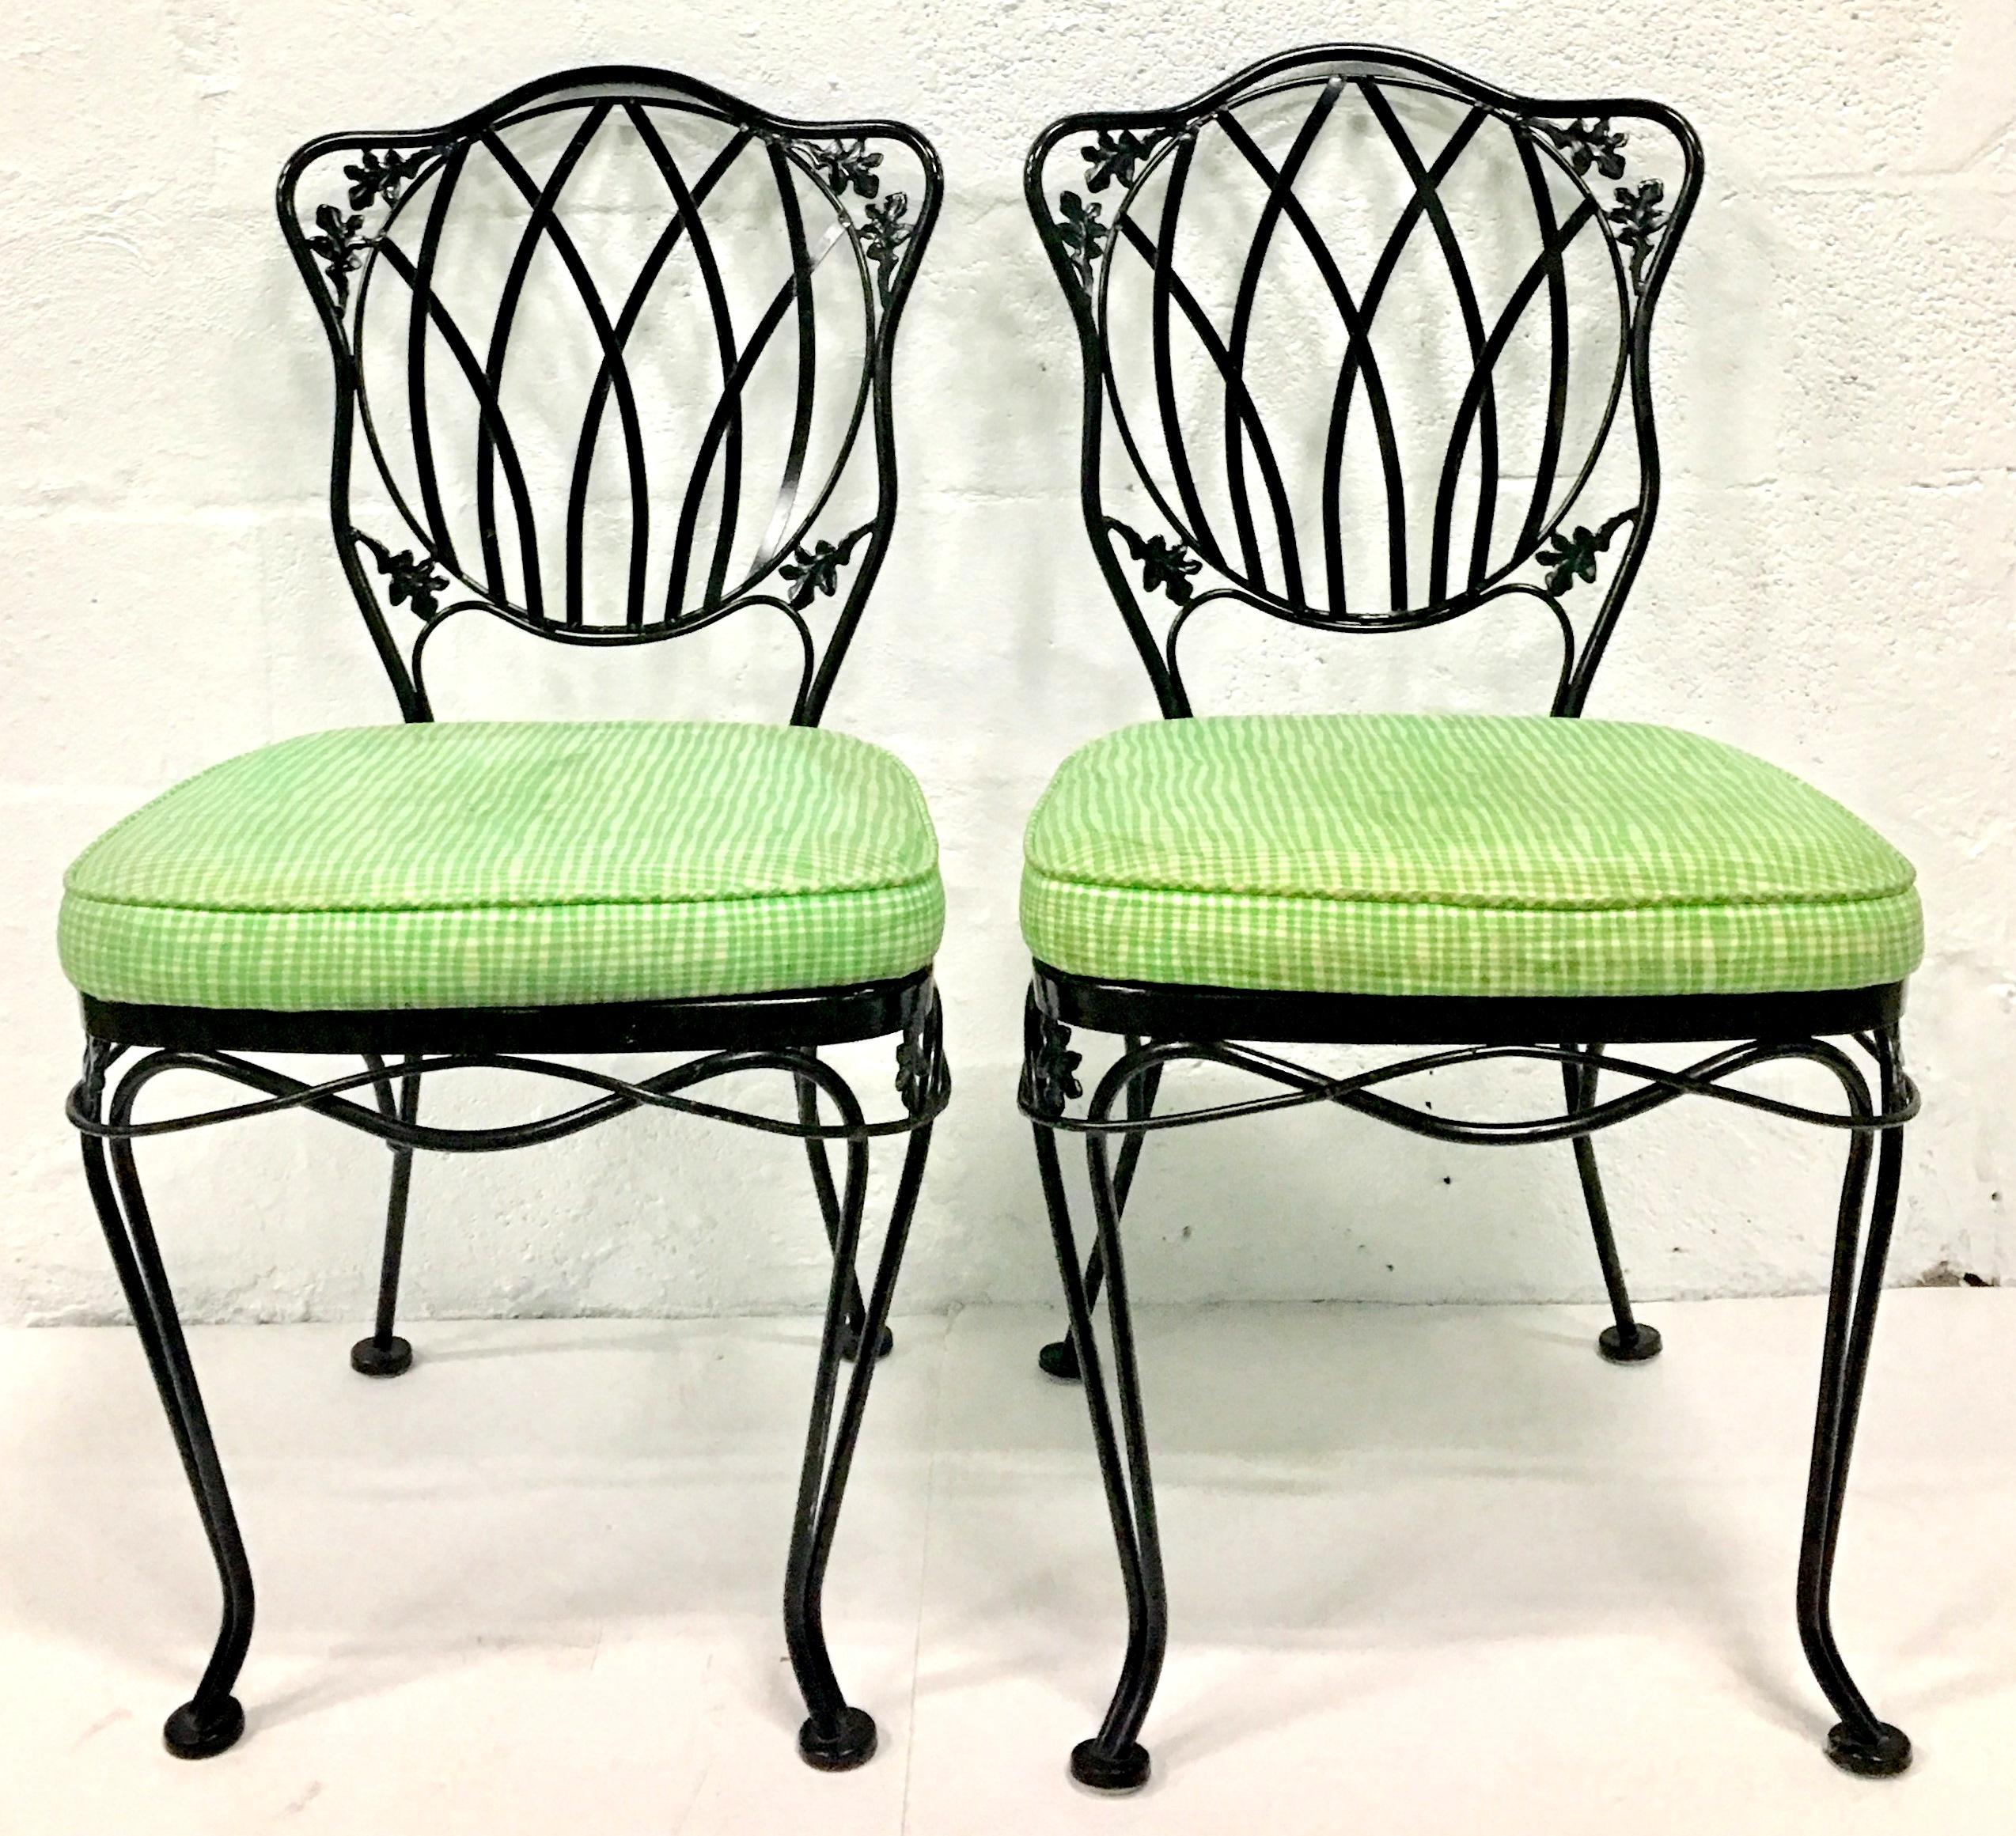 cushions for wrought iron chairs